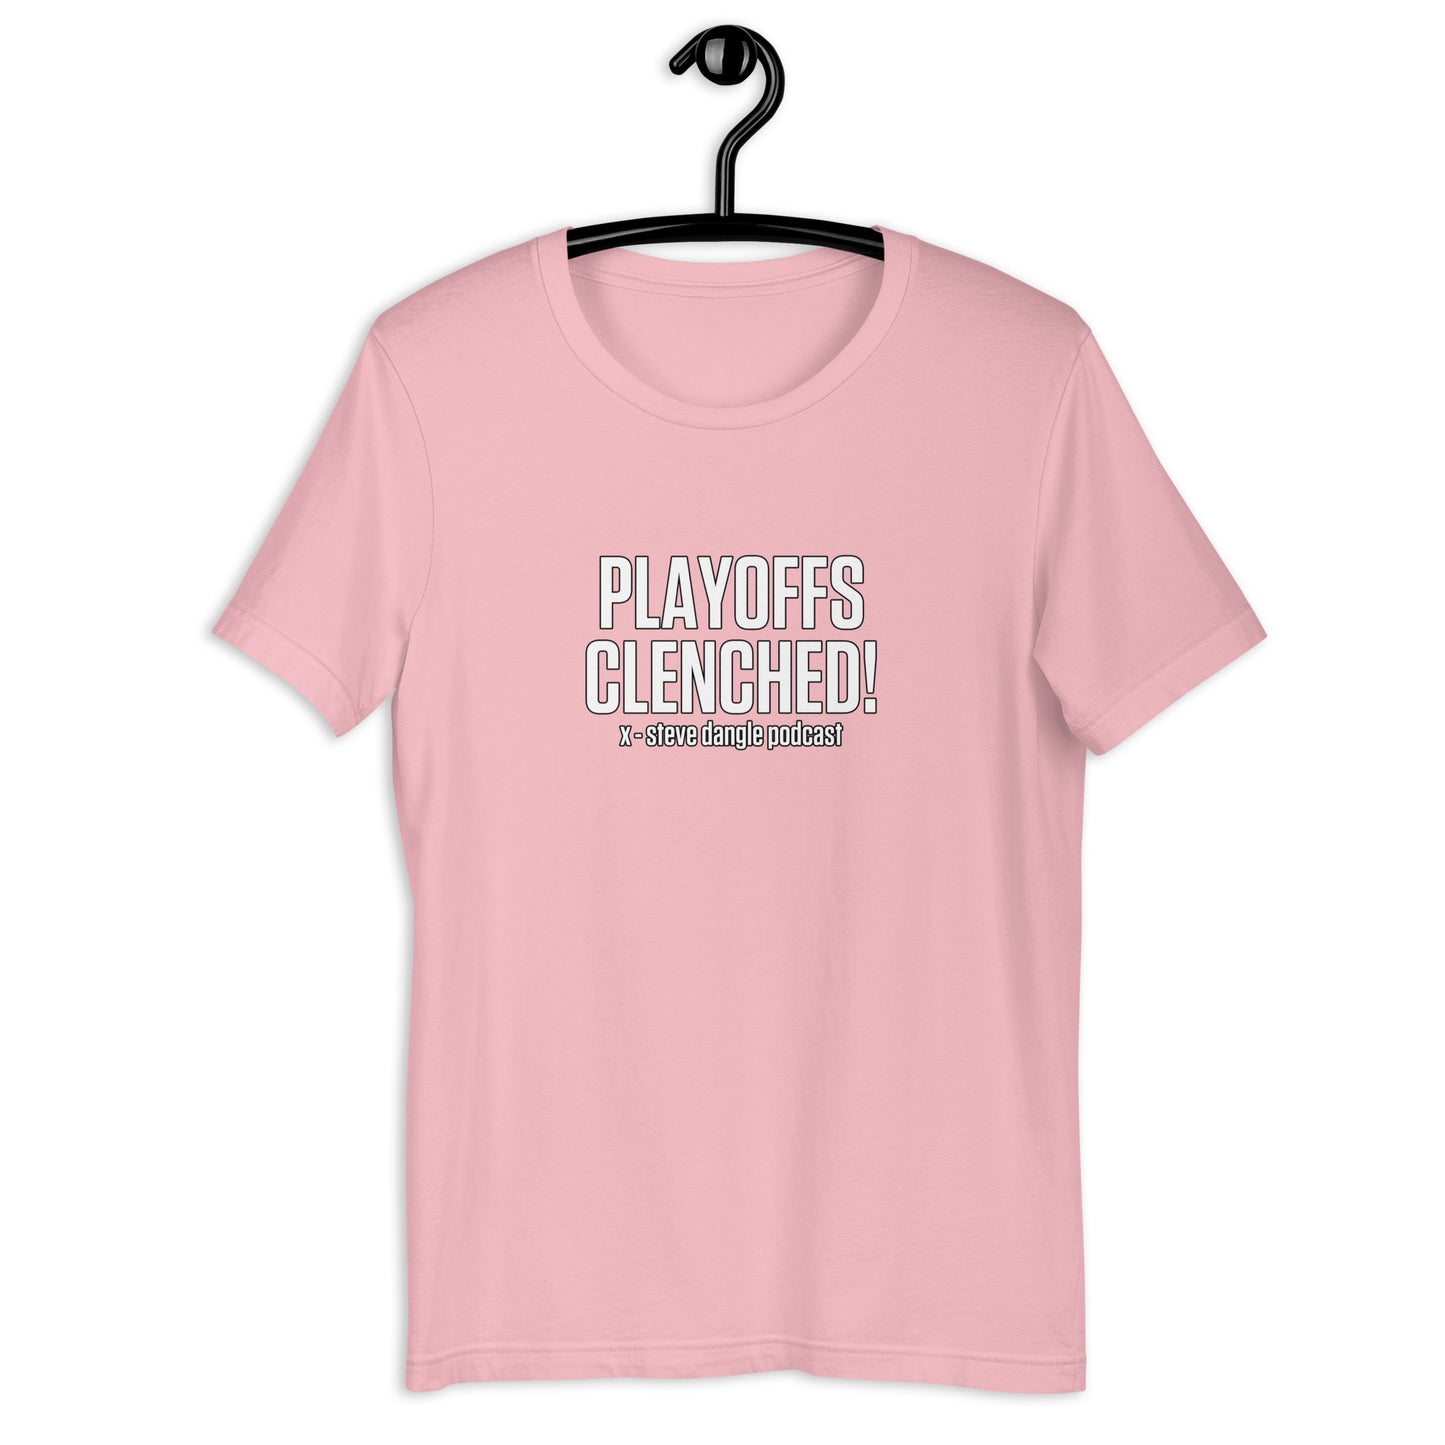 Playoffs Clenched T-Shirt